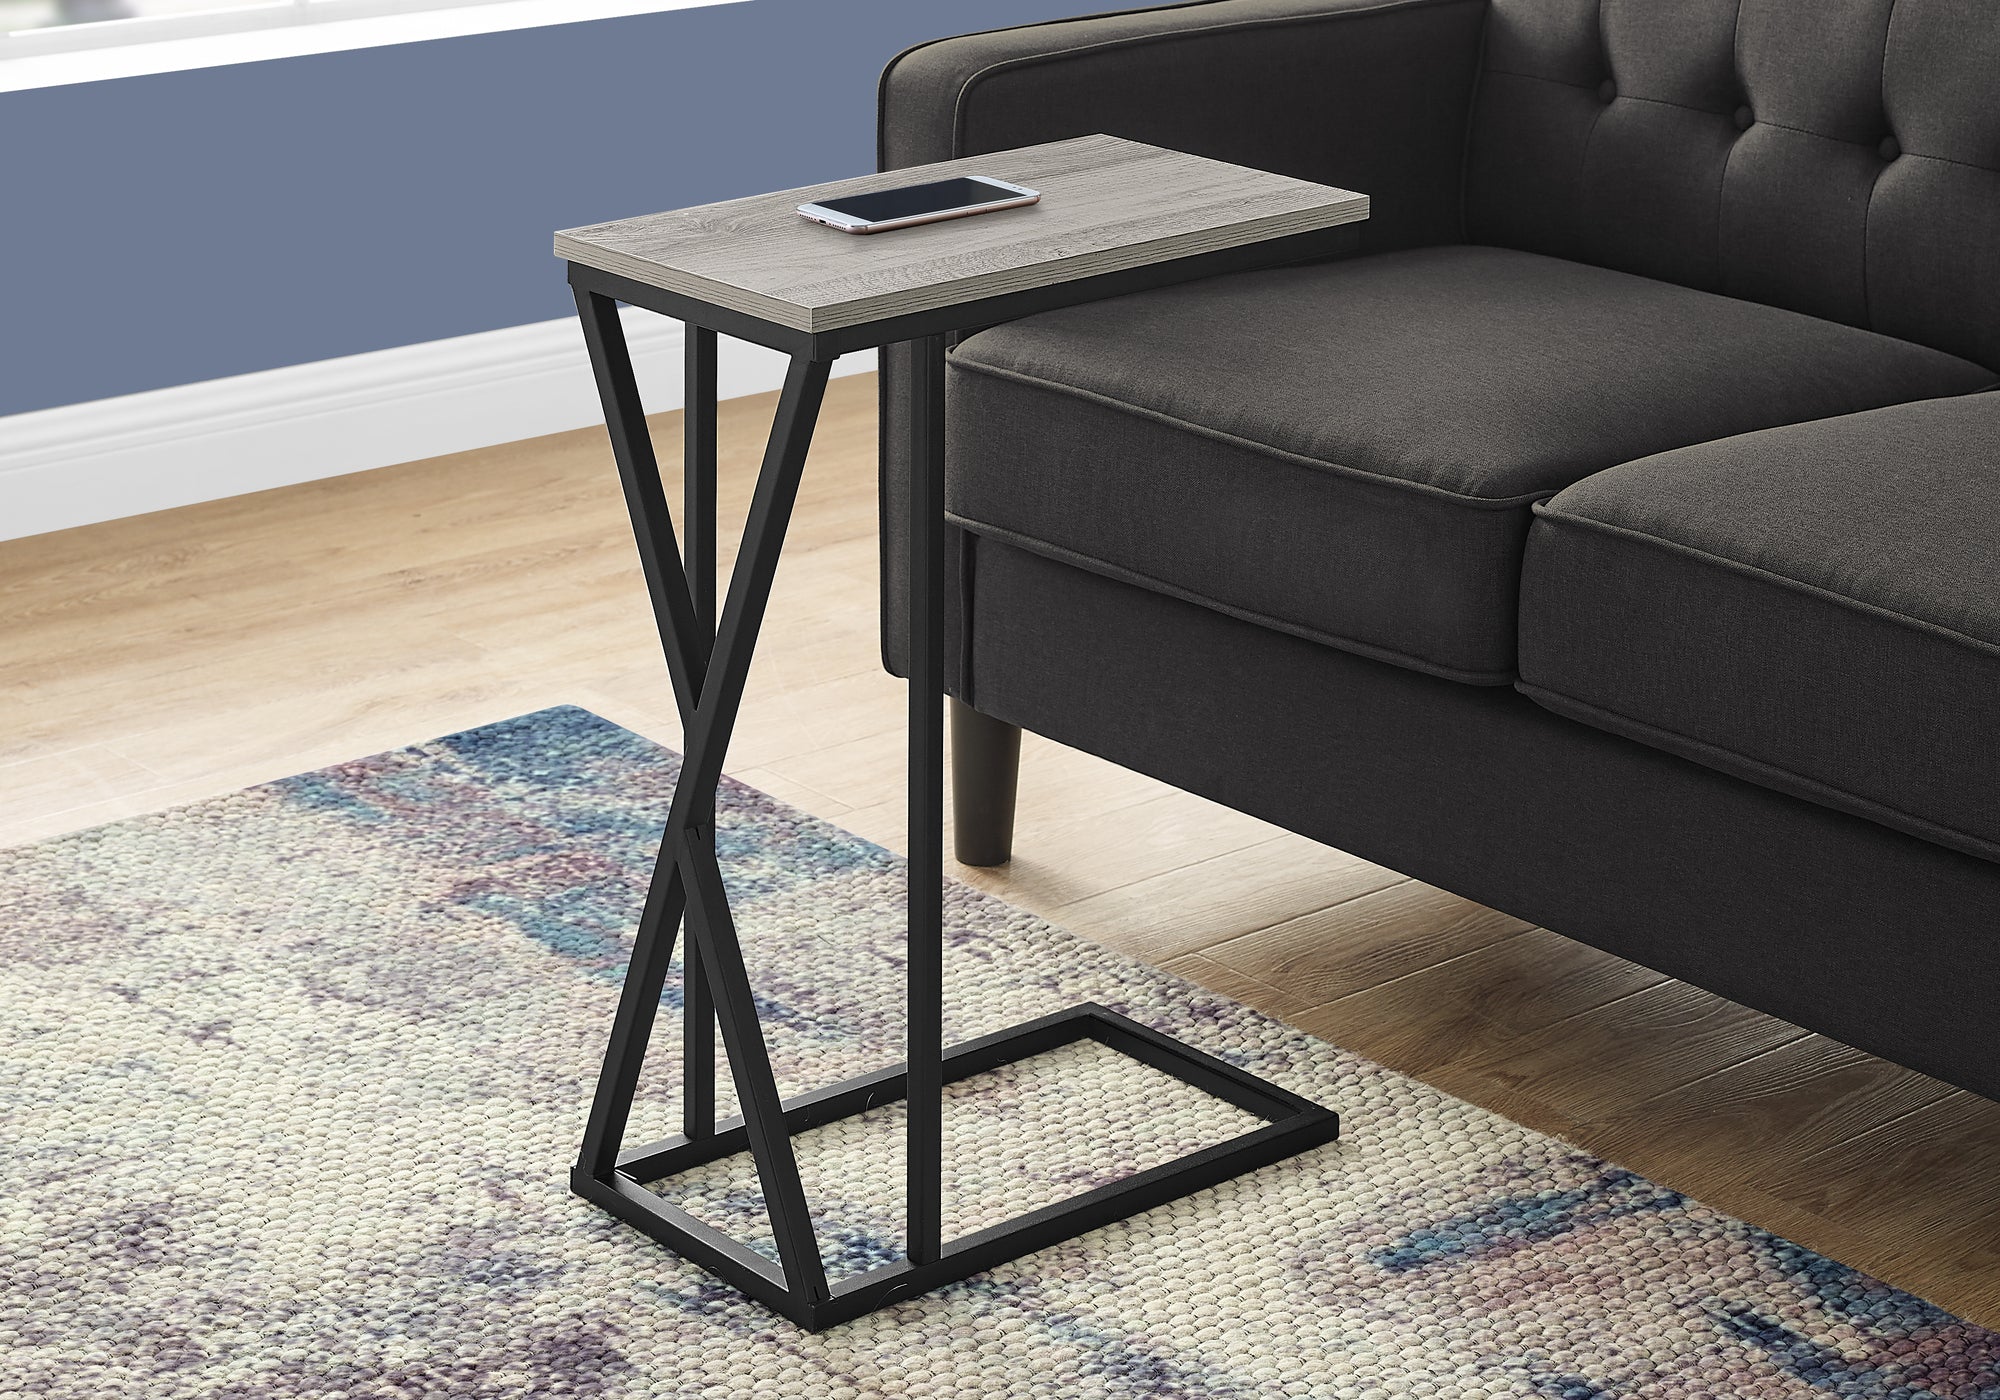 MN-853248    Accent Table, C-Shaped, End, Side, Snack, Living Room, Bedroom, Metal Legs, Laminate, Grey, Black, Contemporary, Modern